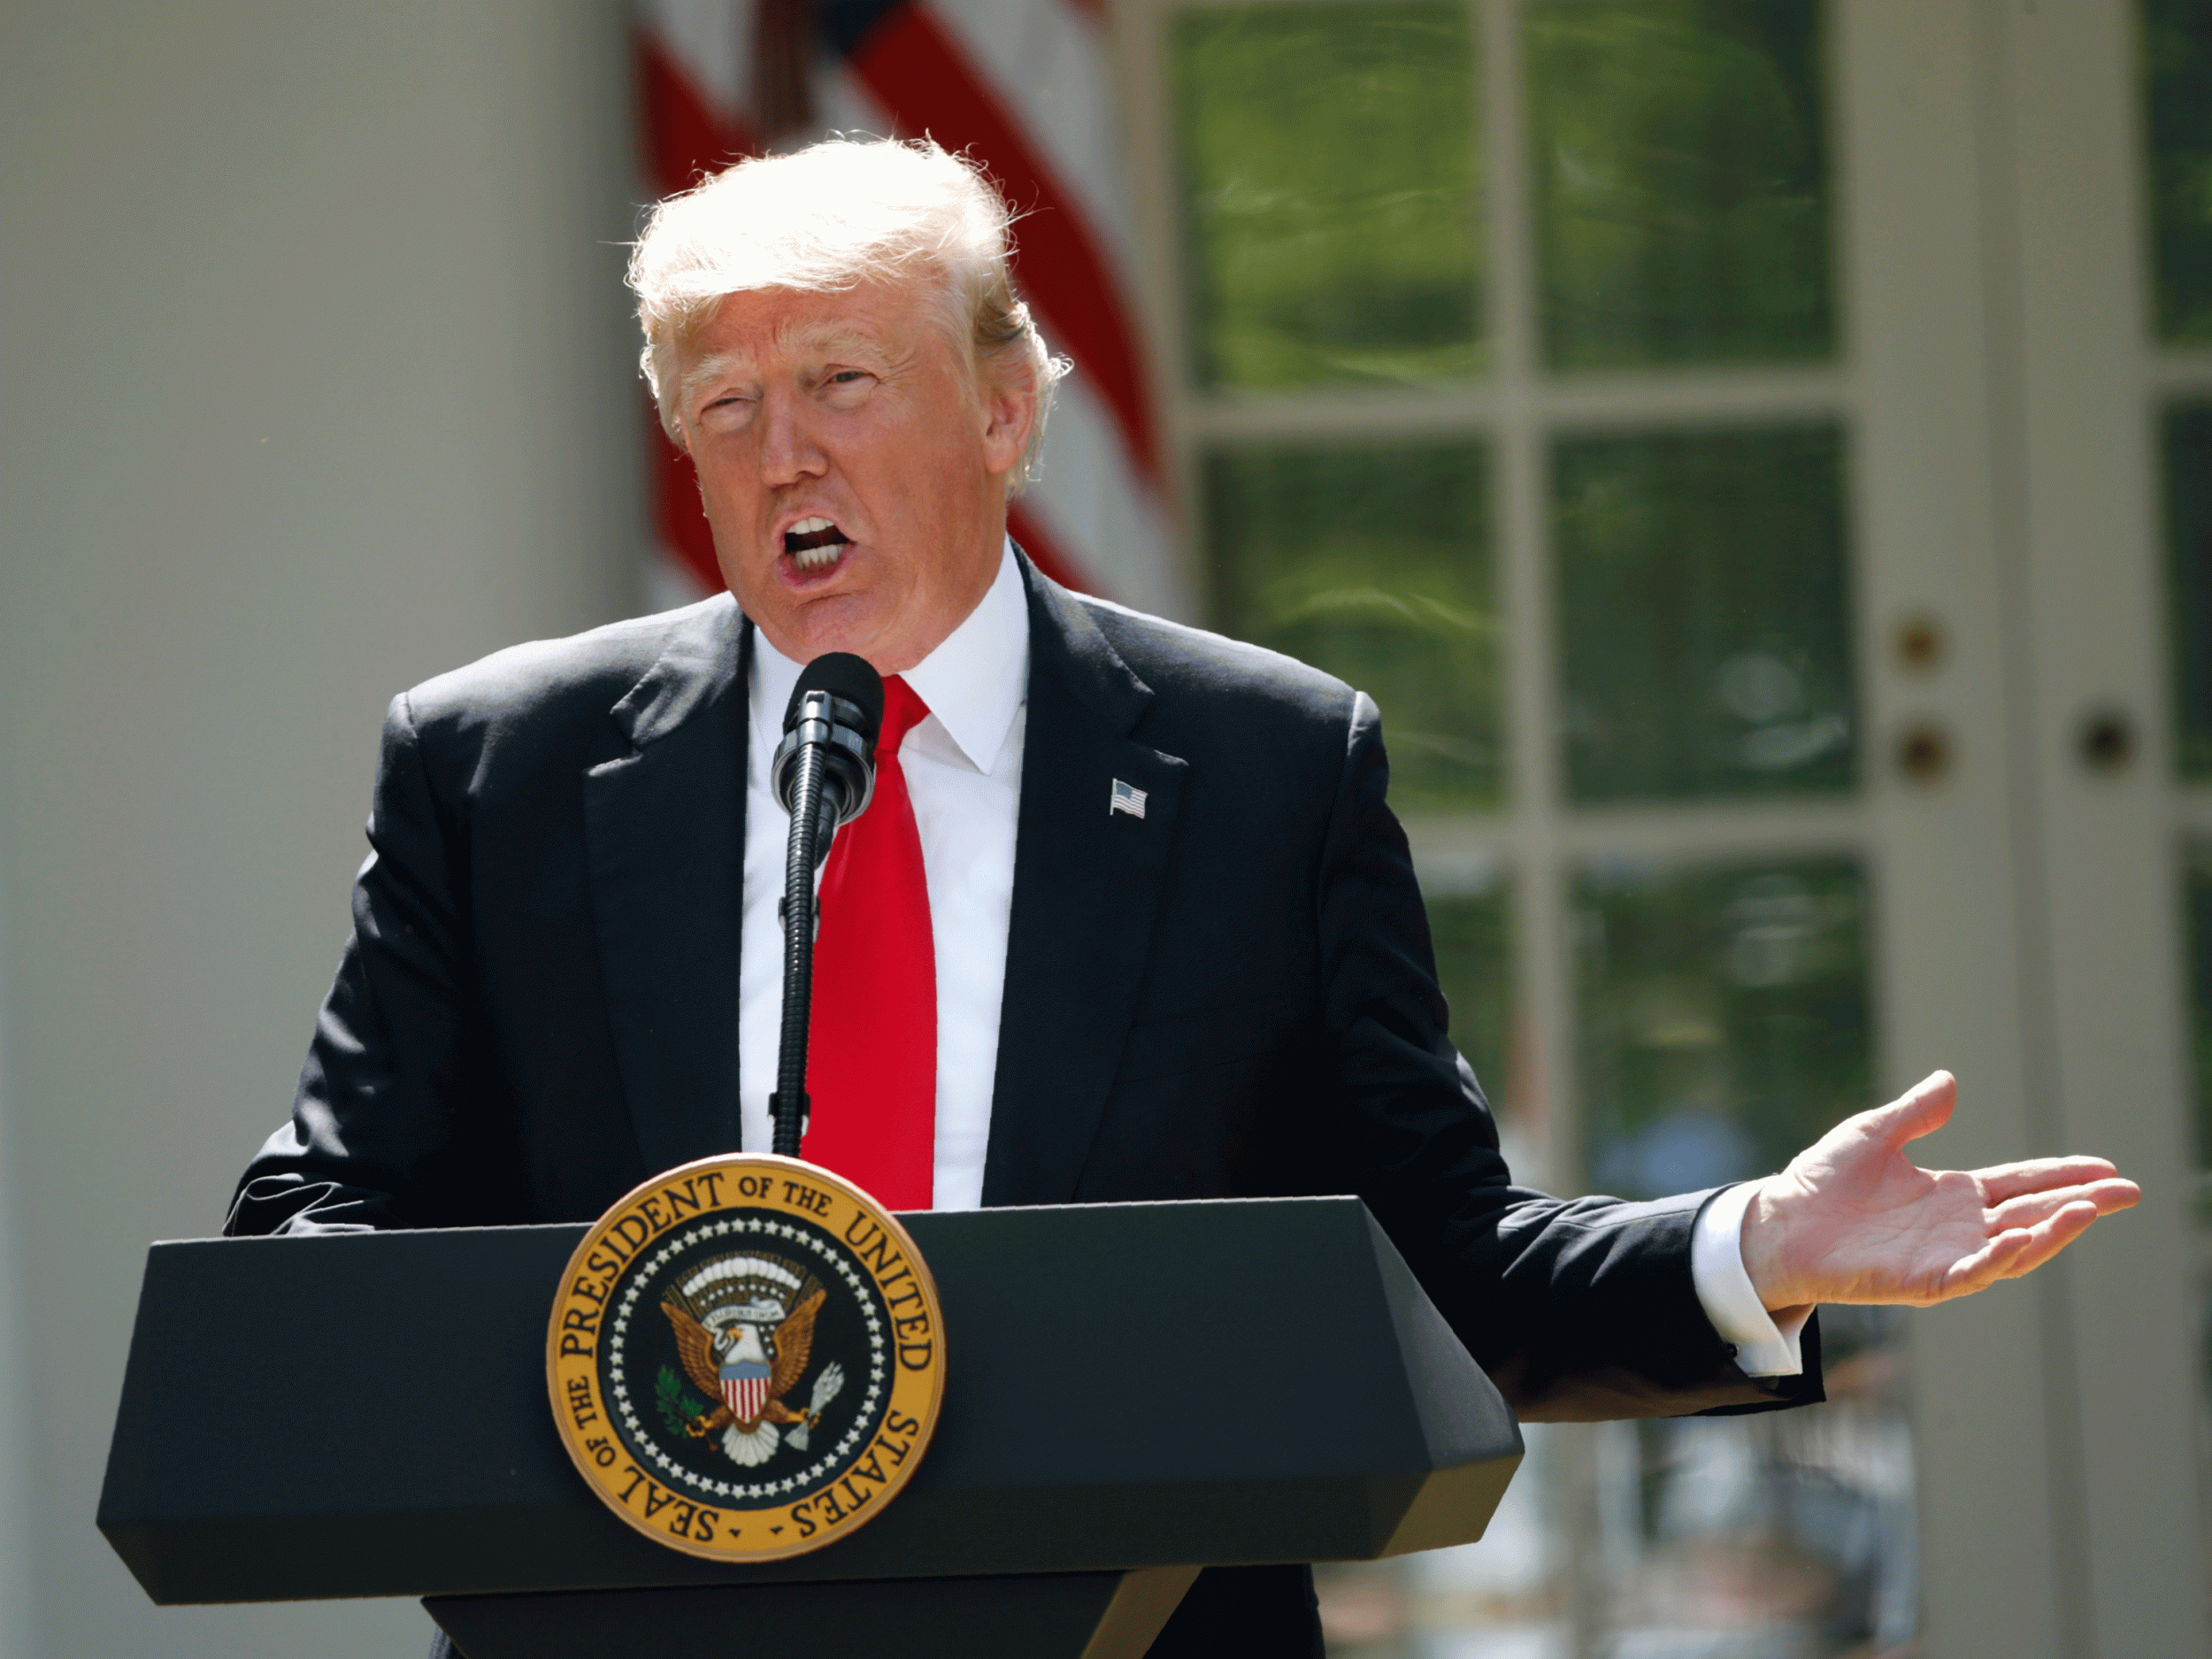 Donald Trump announced his decision in the White House rose garden